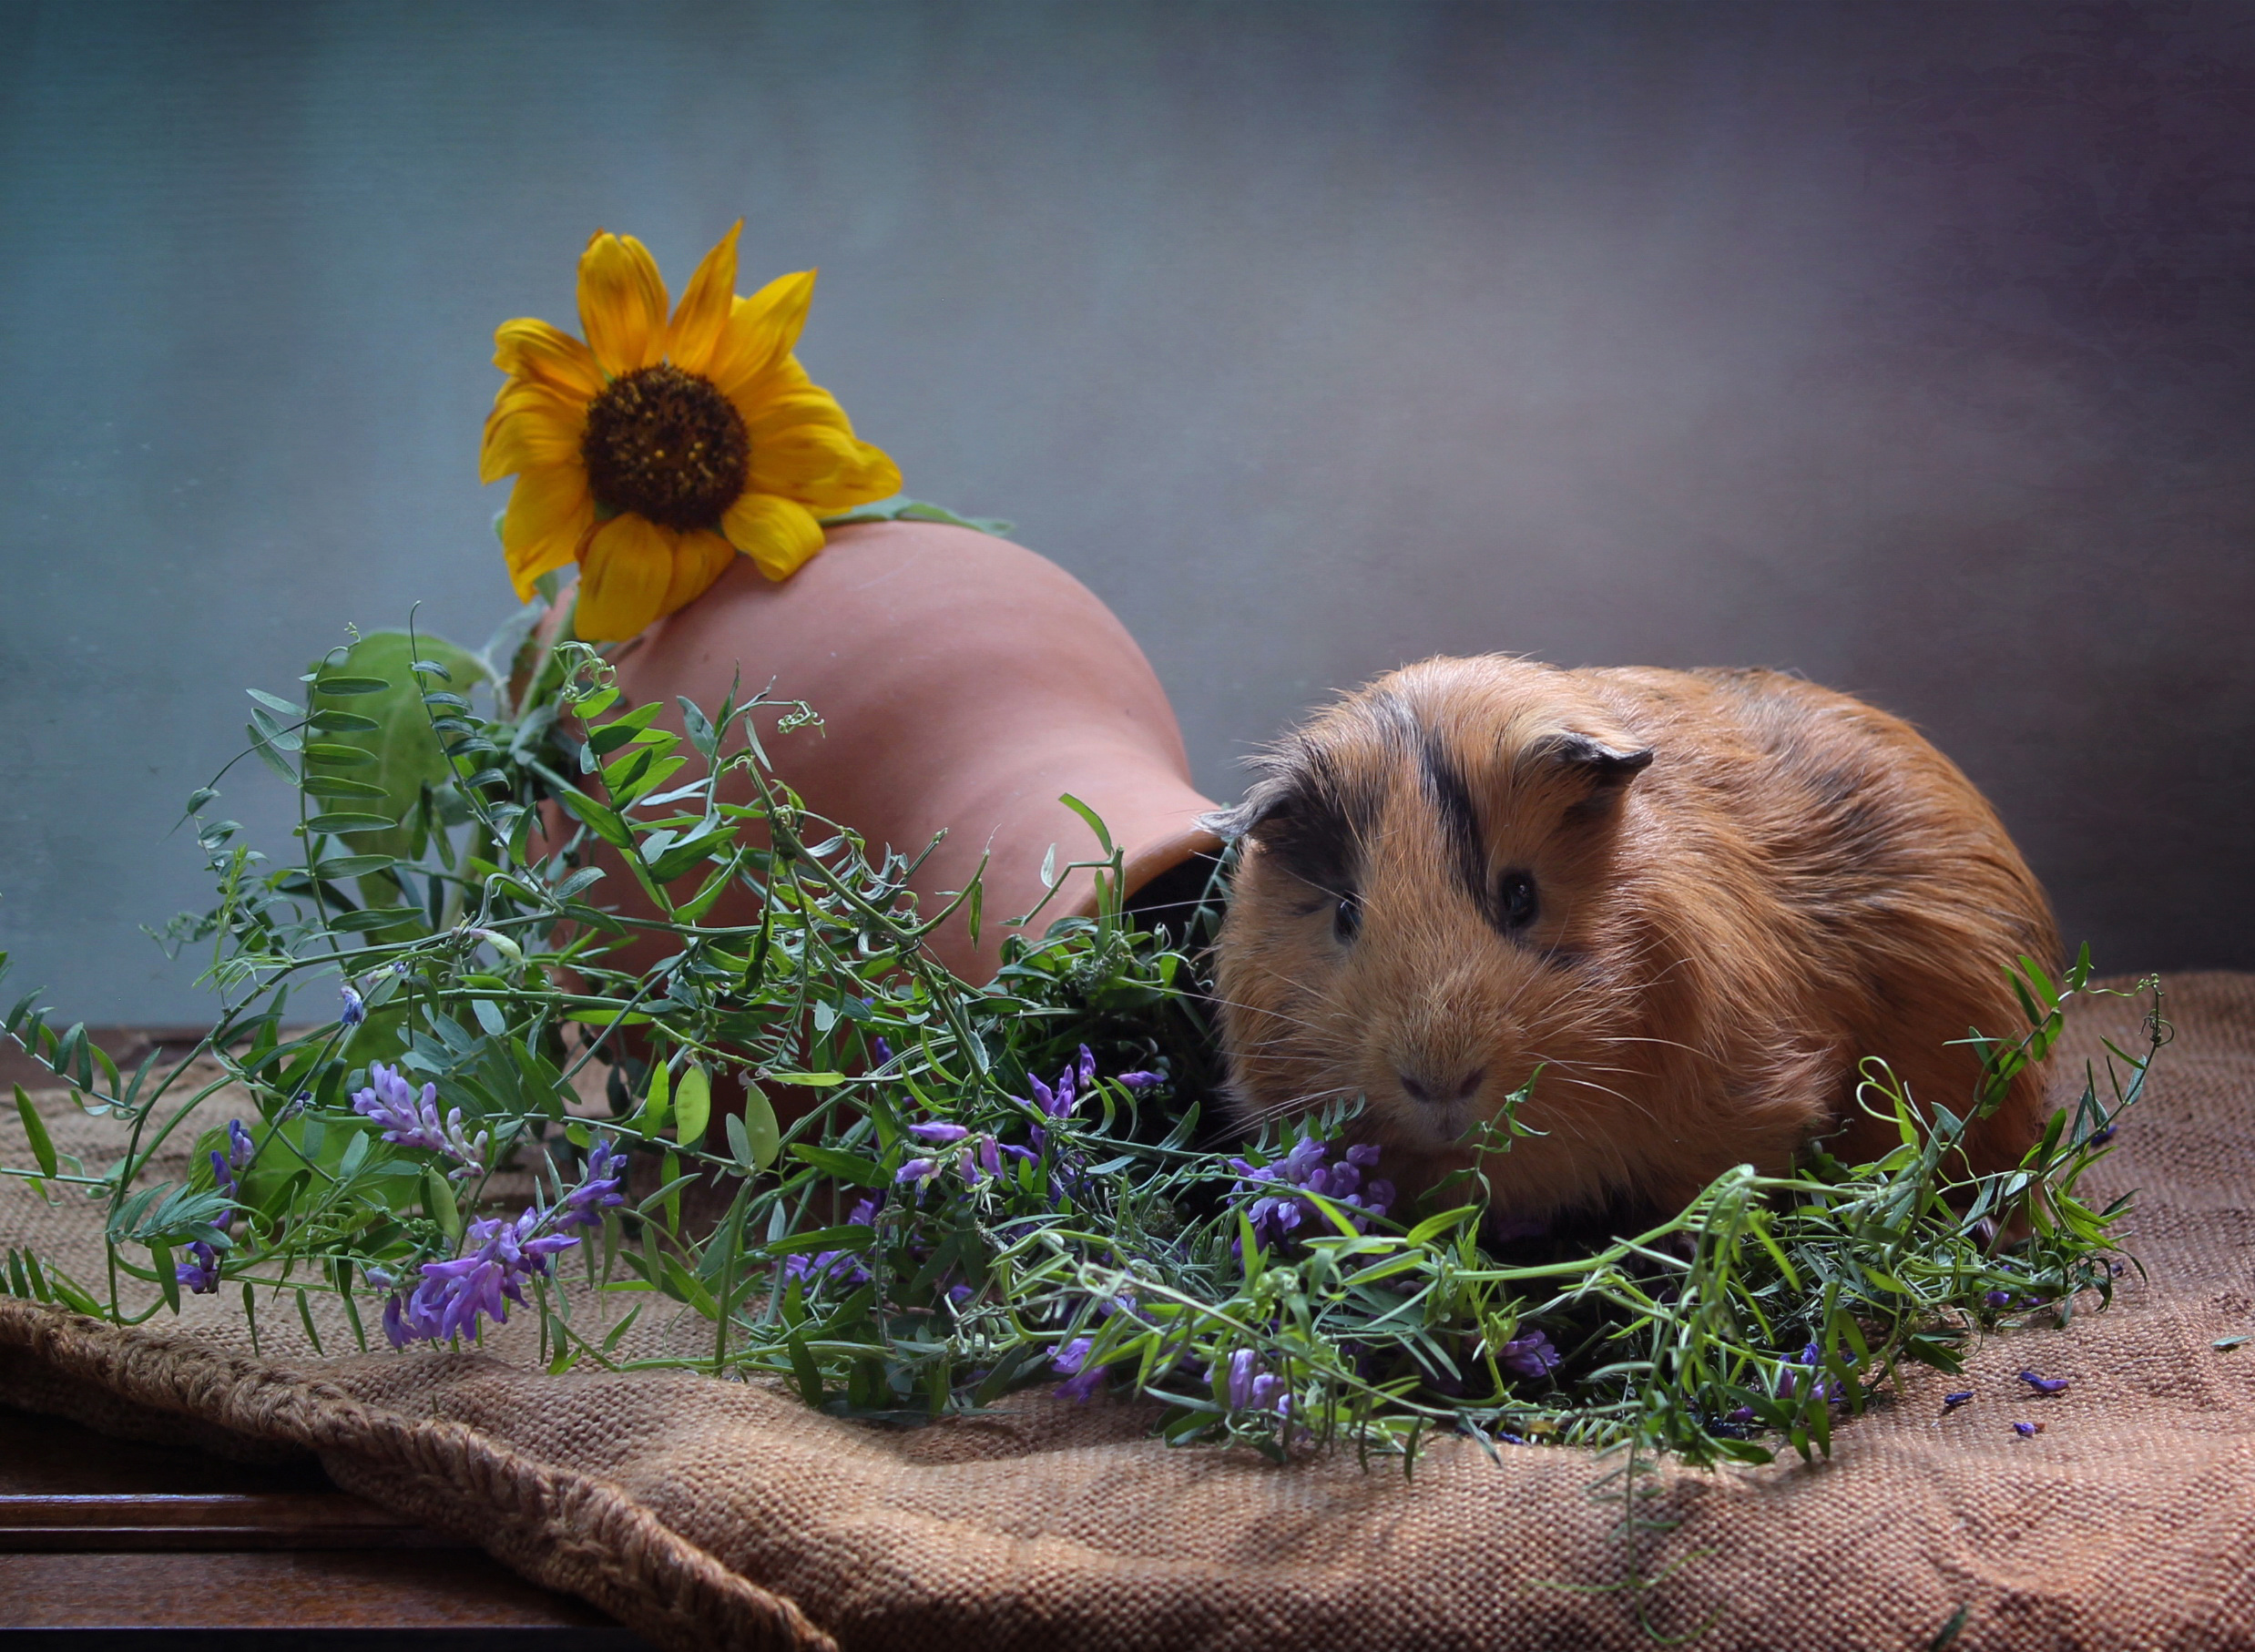 Pictures Guinea pigs Sunflowers Branches Animals 2476x1814 cuy cavy Helianthus animal